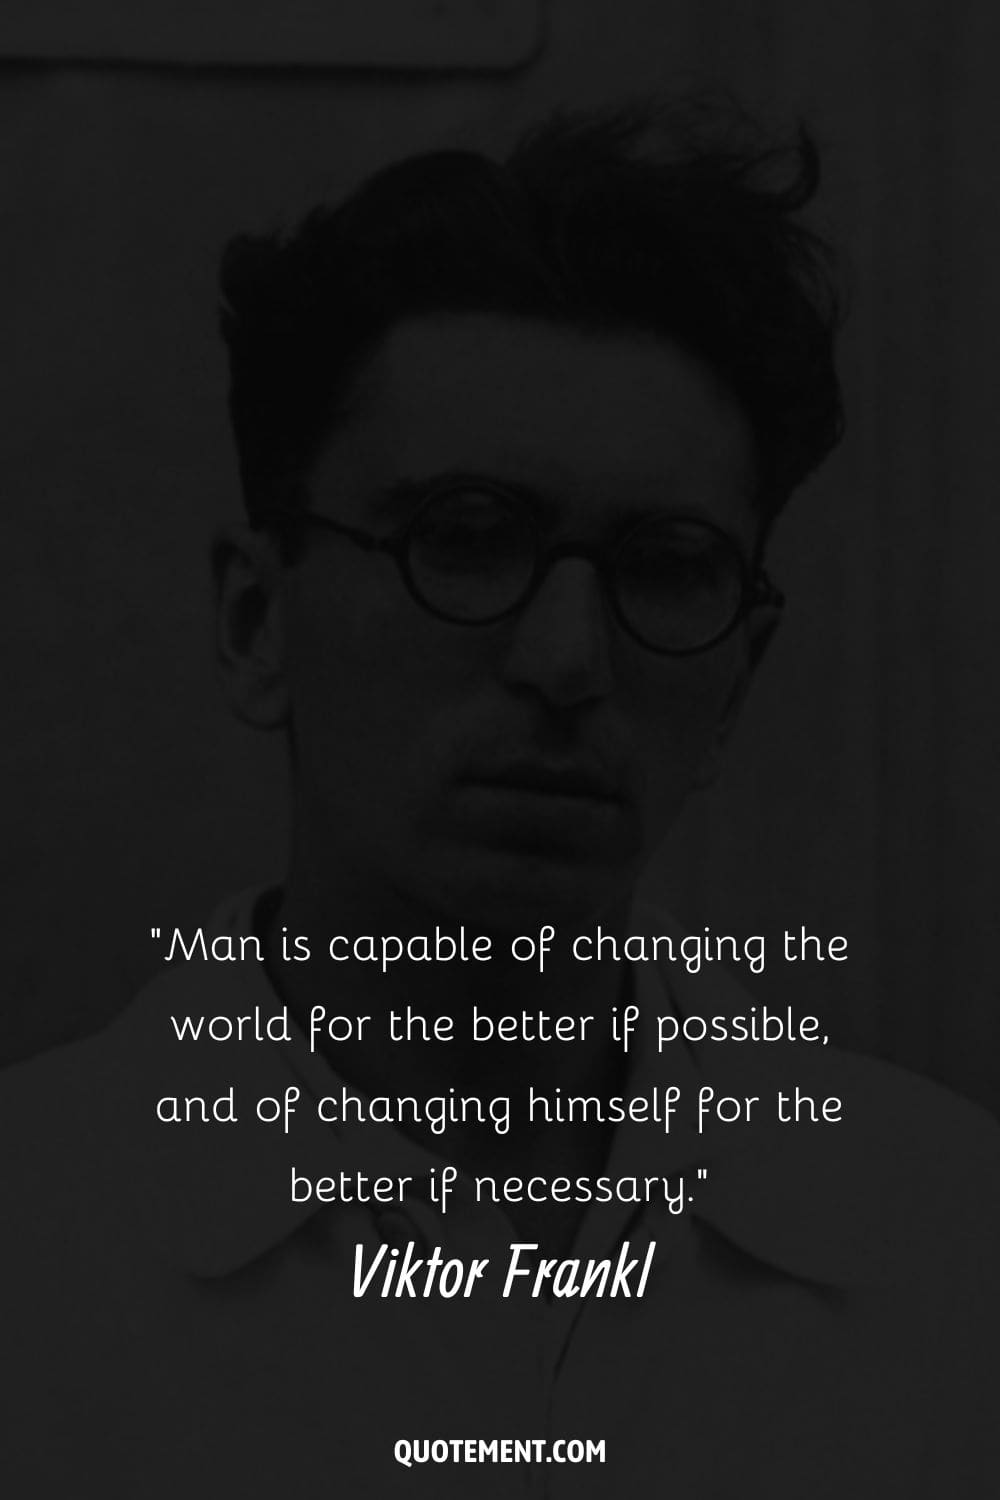 Image of Viktor Frankl posing in white shirt representing his quote about change.